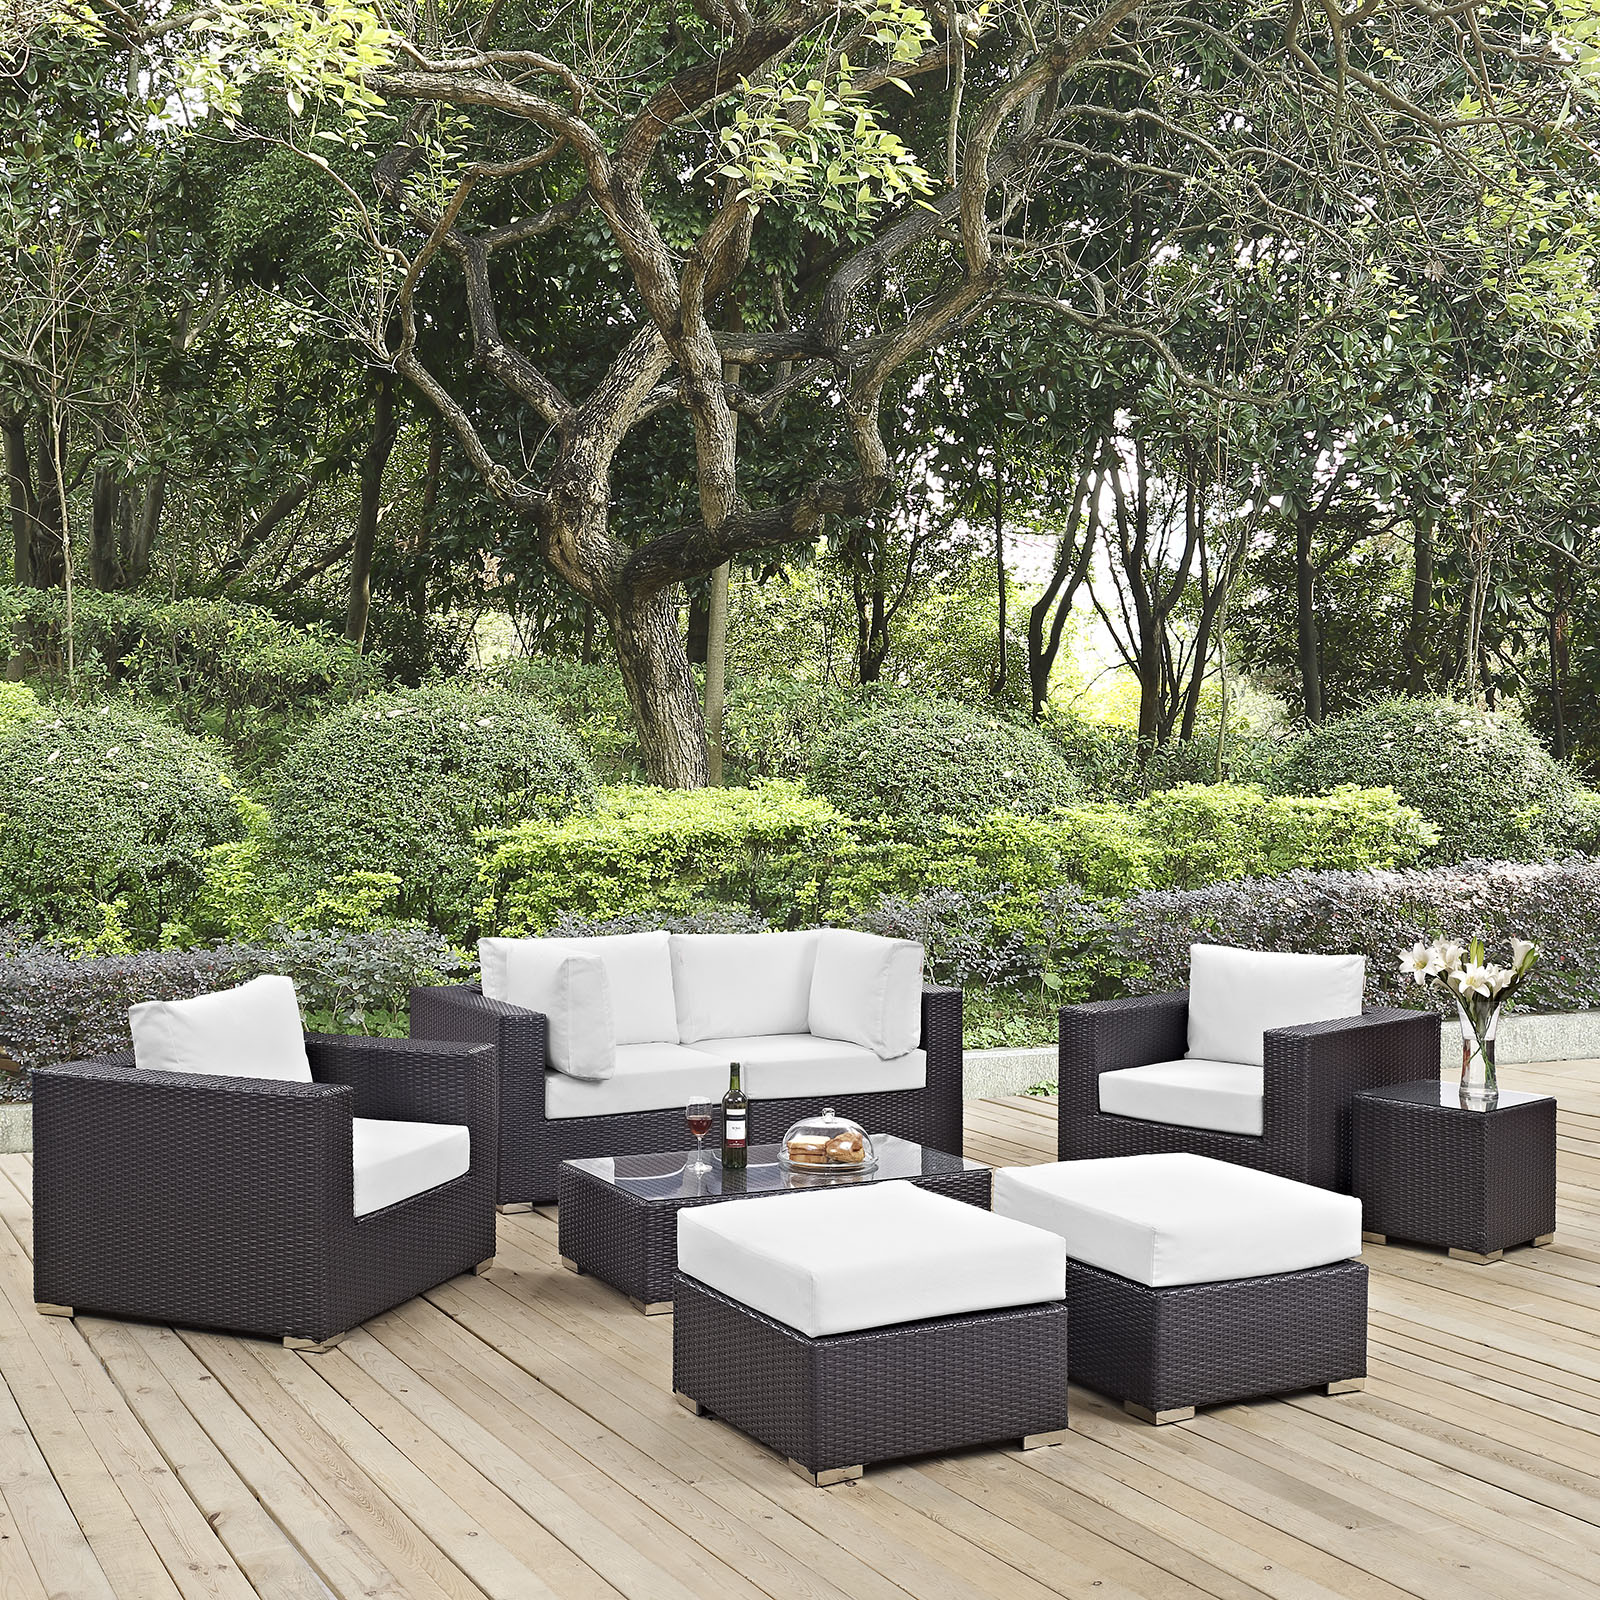 Modway Convene 8 Piece Outdoor Patio Sectional Set in Espresso White - image 1 of 11